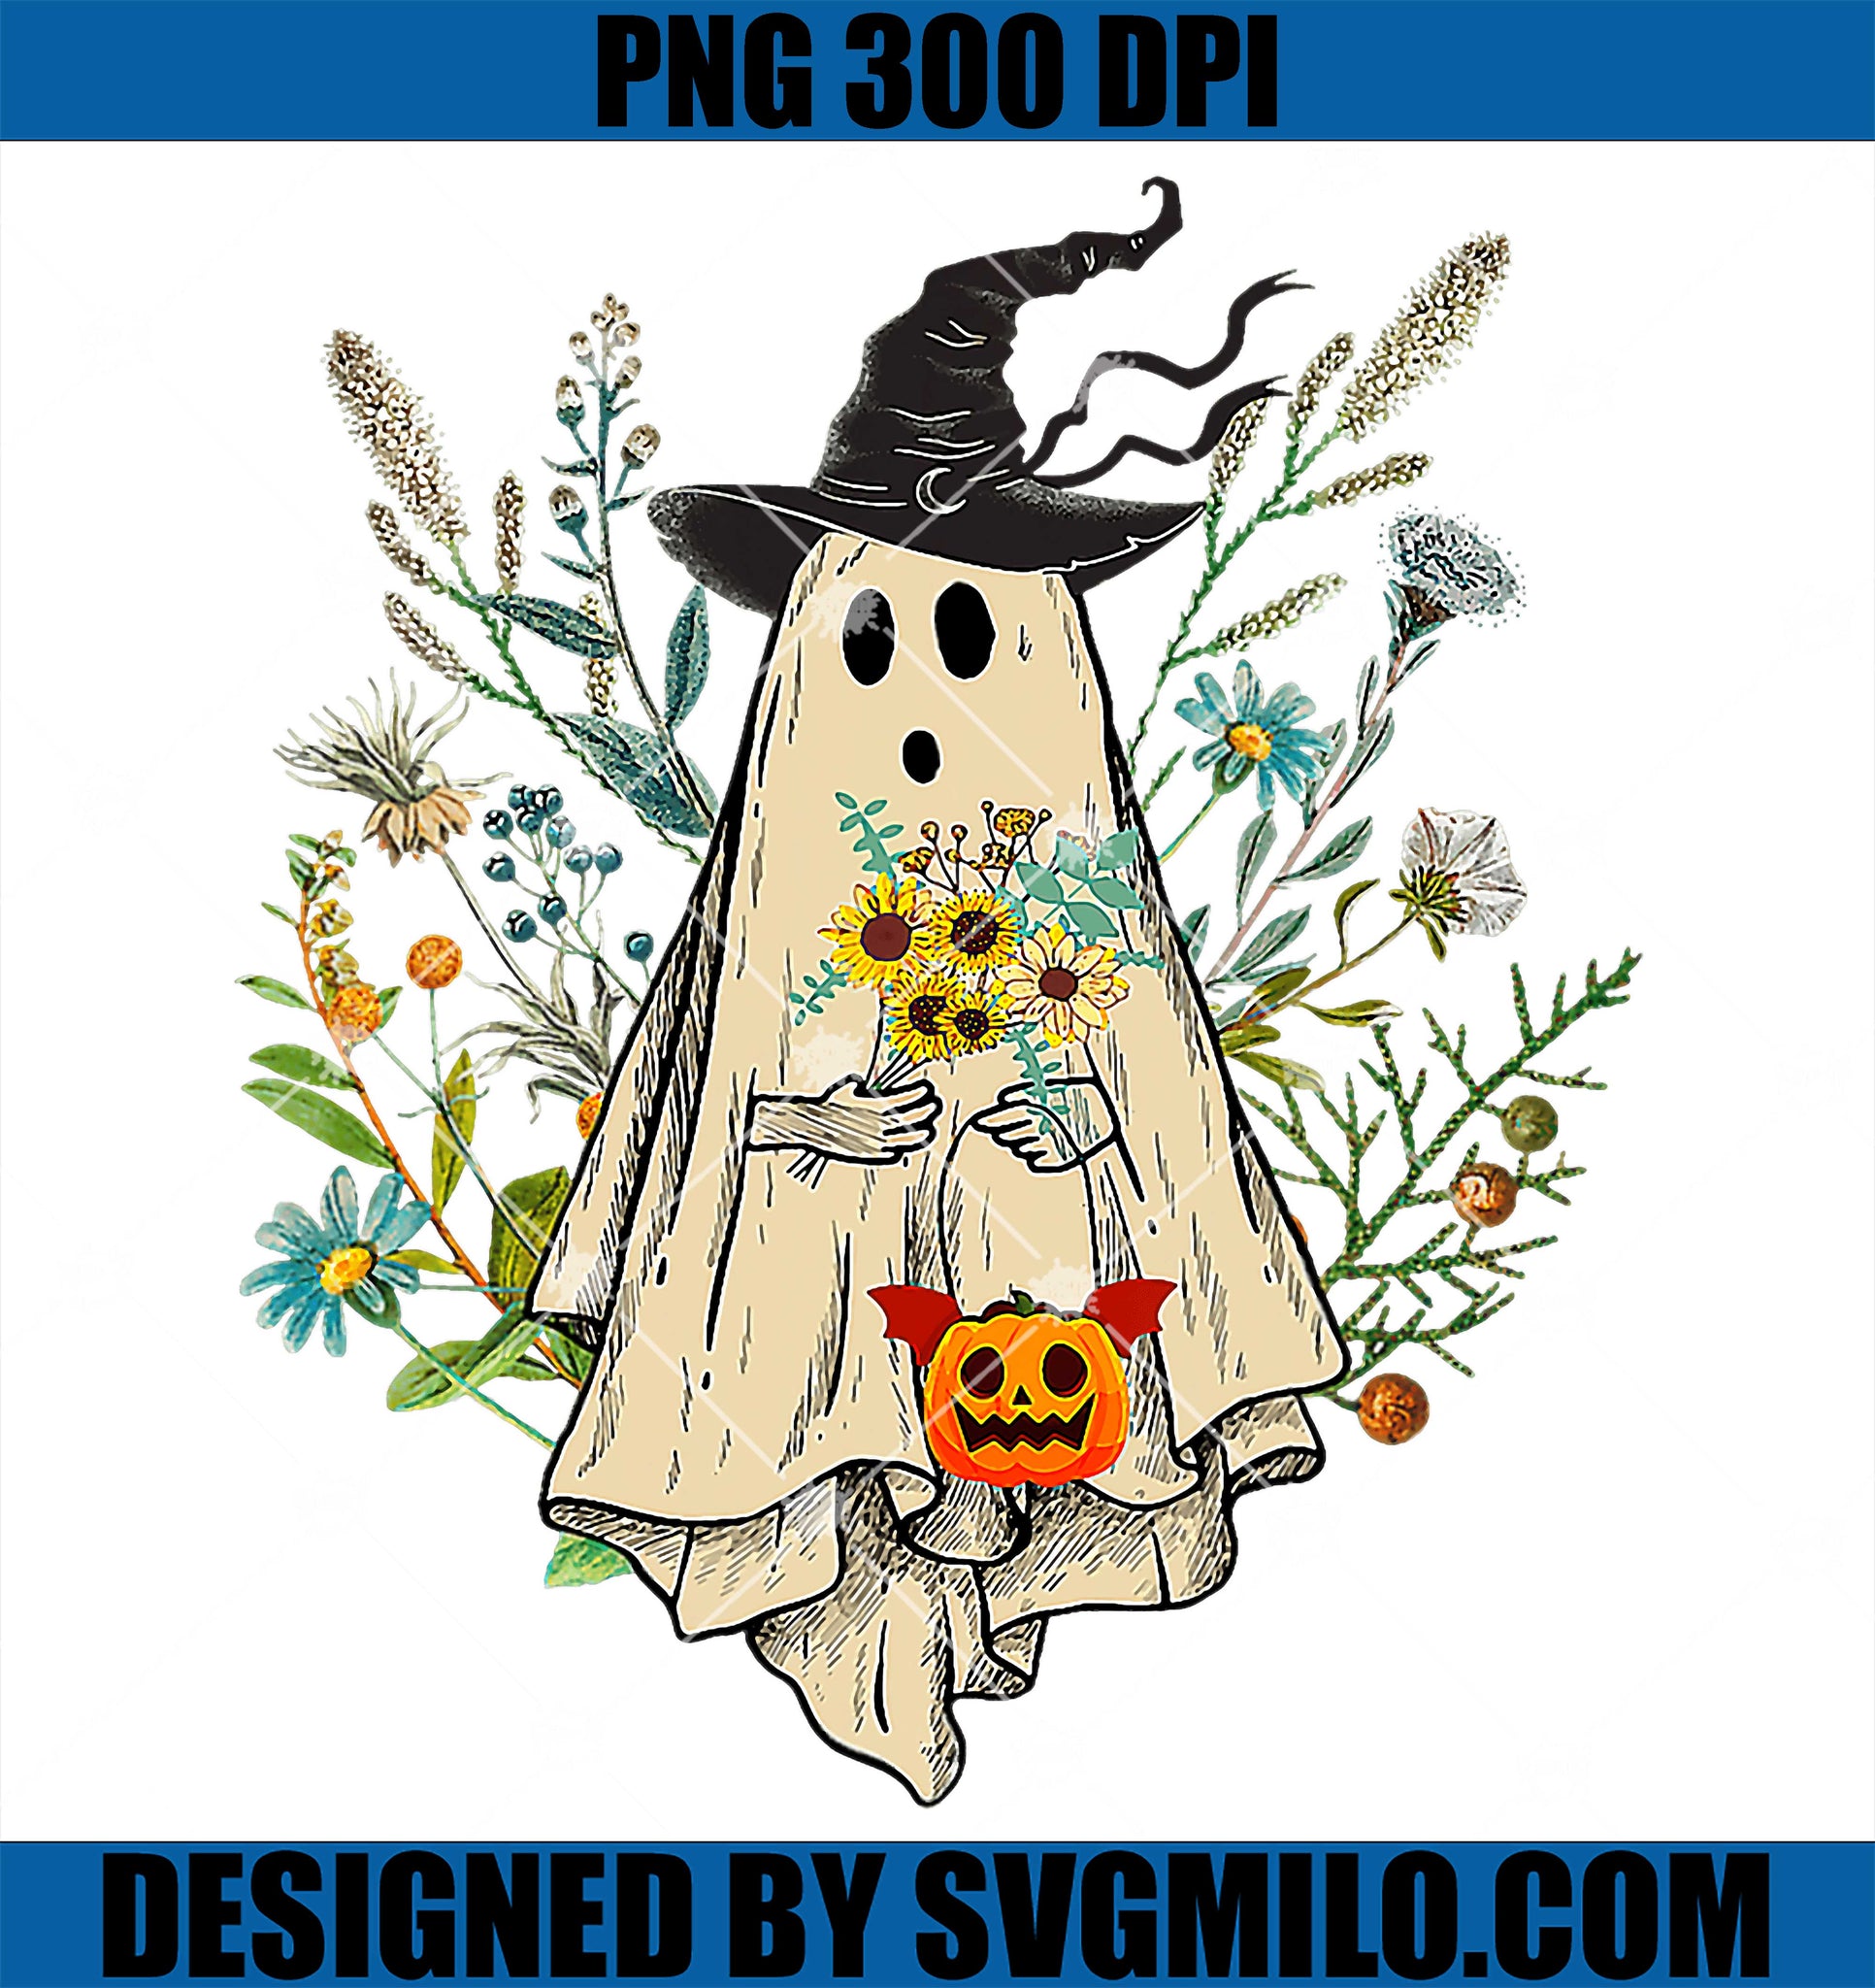 Funny Floral Ghost Cute Boo Scary PNG, Vintage Halloween Spooky PNG